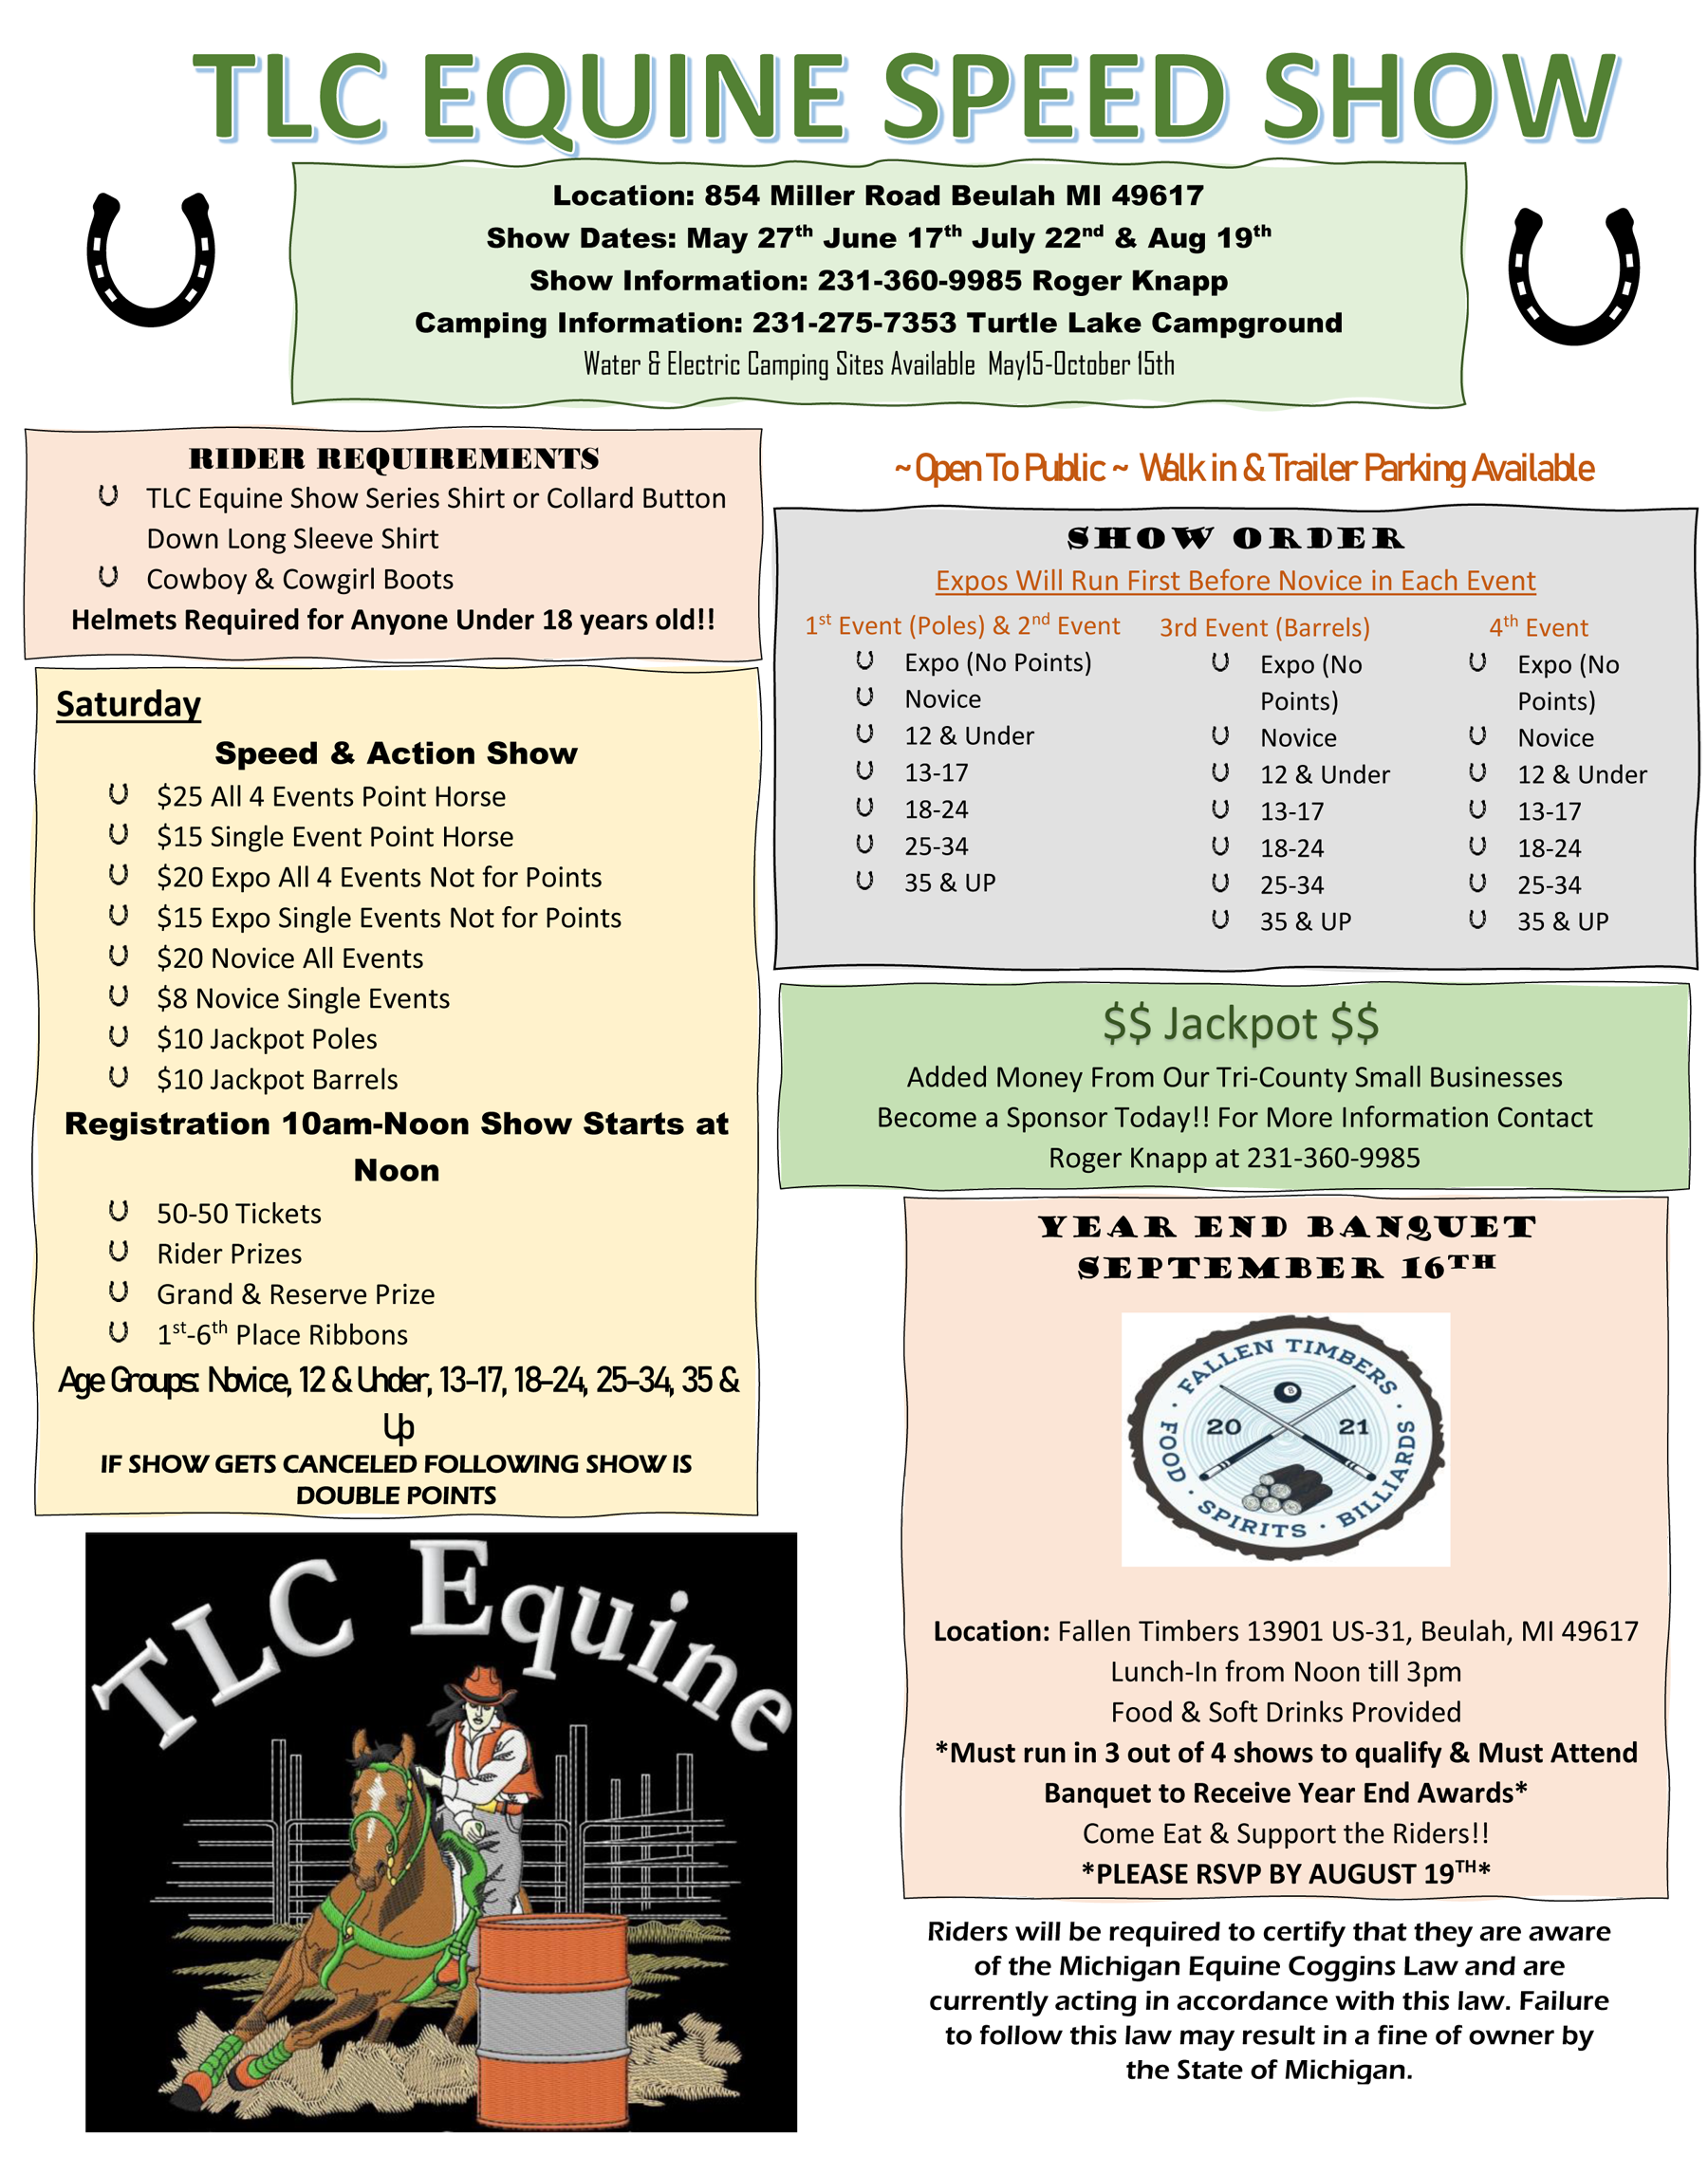 TLC Equine Speed show at Turtle Lake Campground